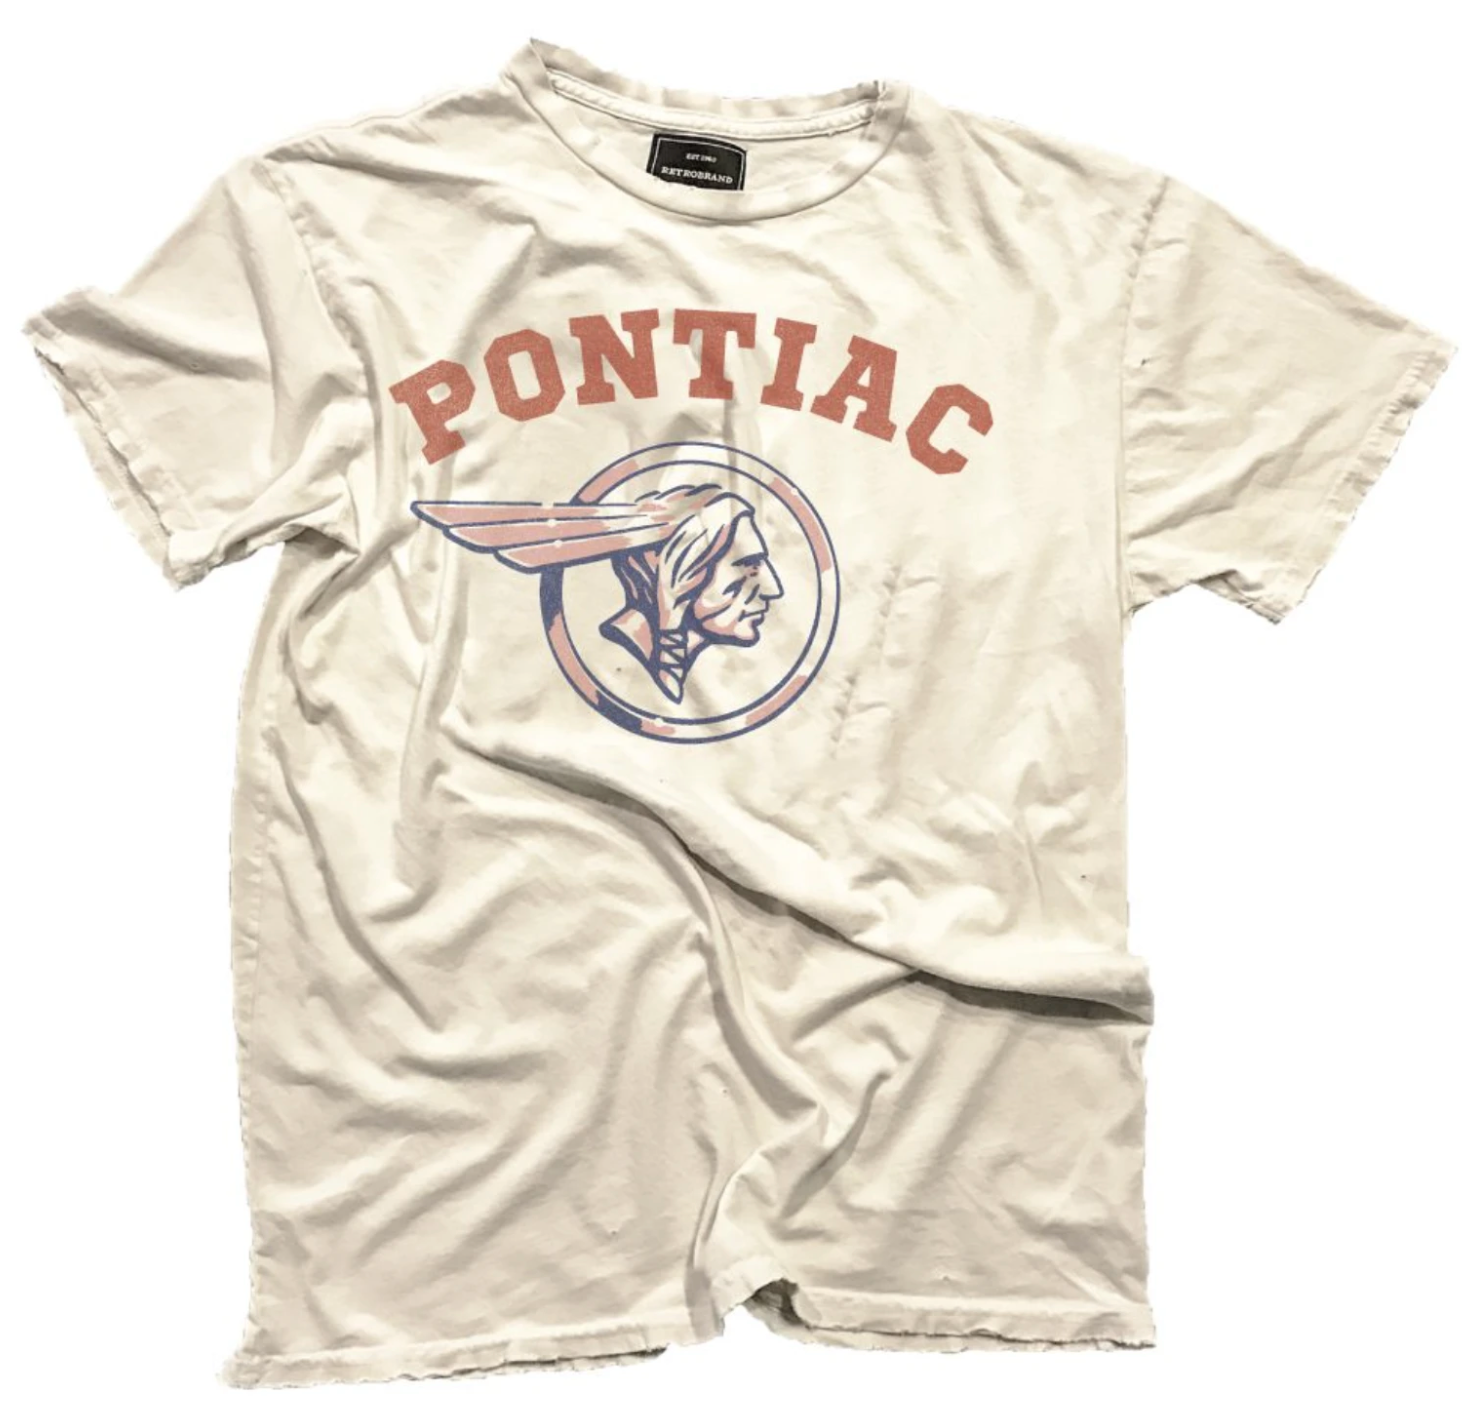 Pontiac in faded red print with vintage Chief Pontiac logo centered below